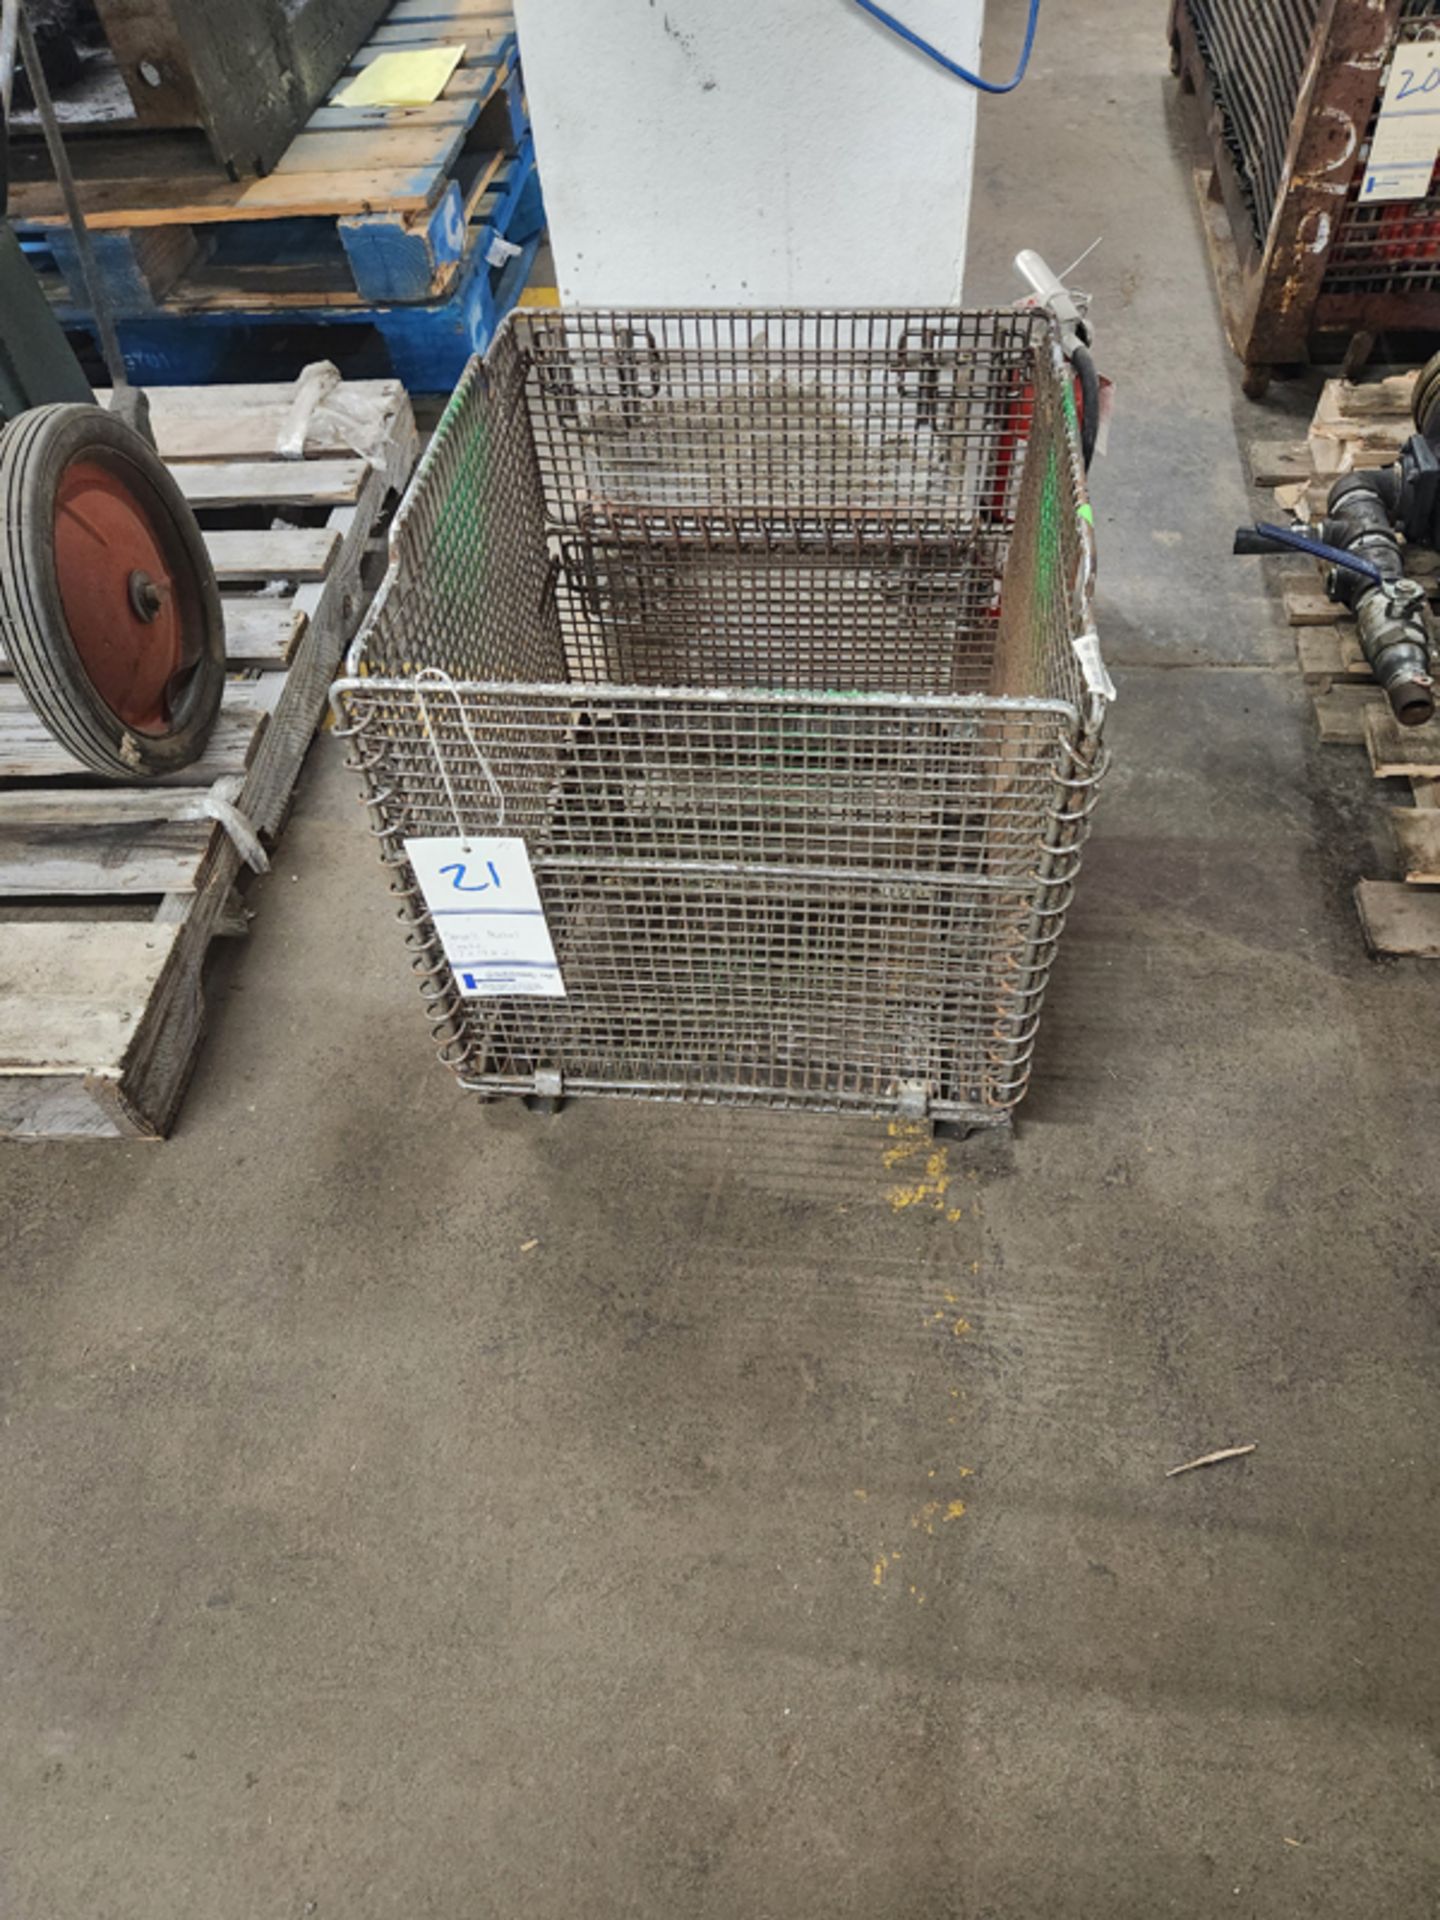 SMALL METAL CRATE 17" X 19" X 21"